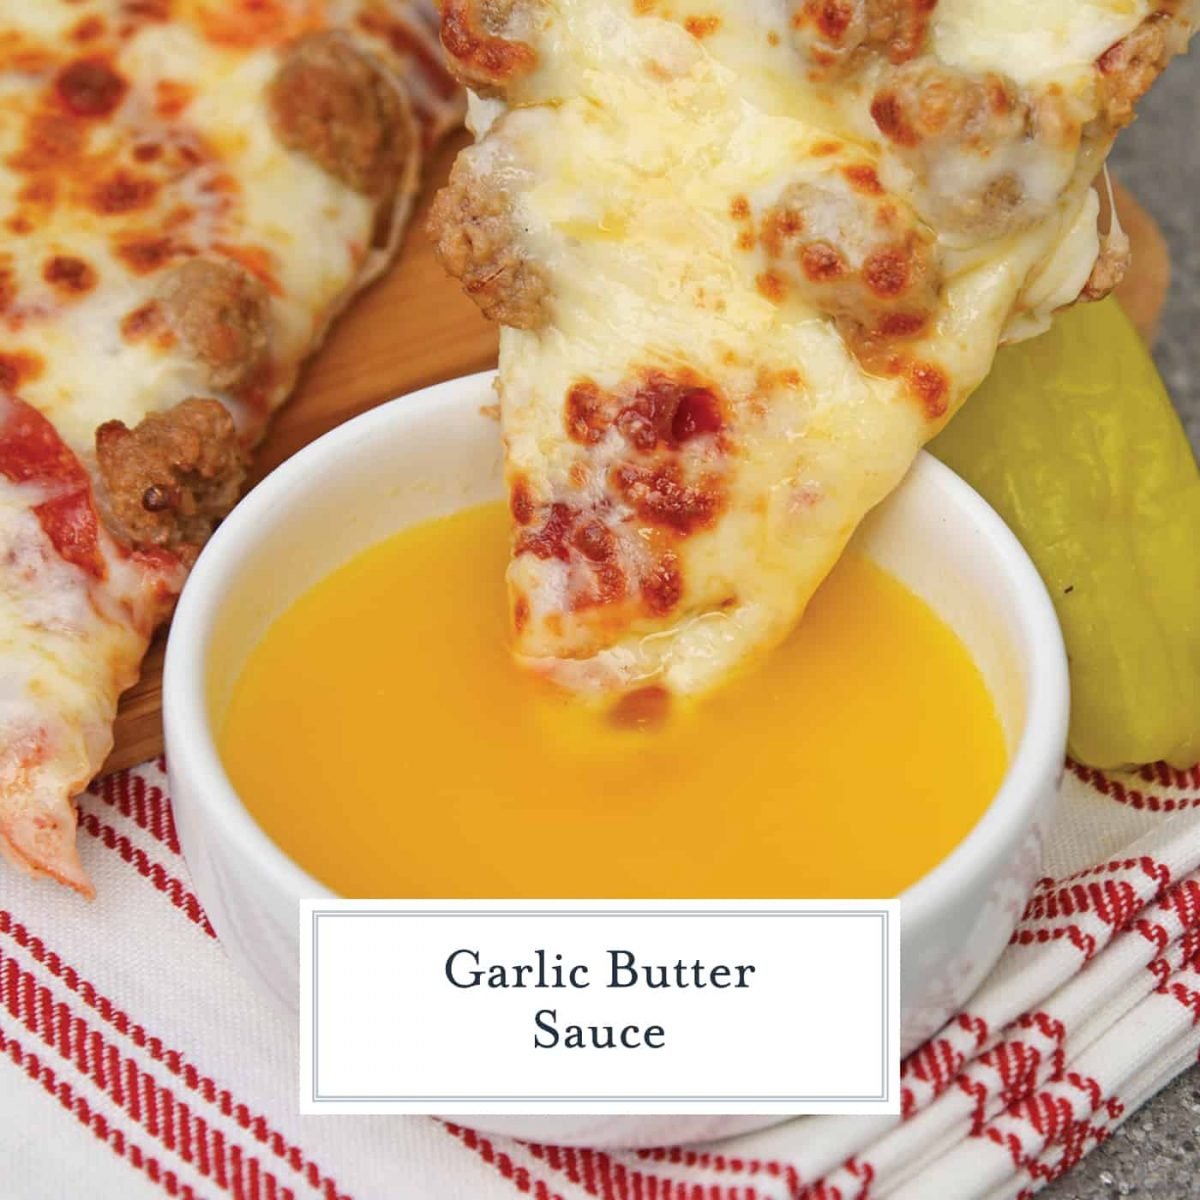 If you've ever wondered how to make garlic butter sauce, wonder no more. This recipe is just like the Papa John's dipping sauce for pizza or breadsticks! #garlicbuttersauce #howtomakegarlicbuttersauce #papajohnsdippingsauce www.savoryexperiments.com